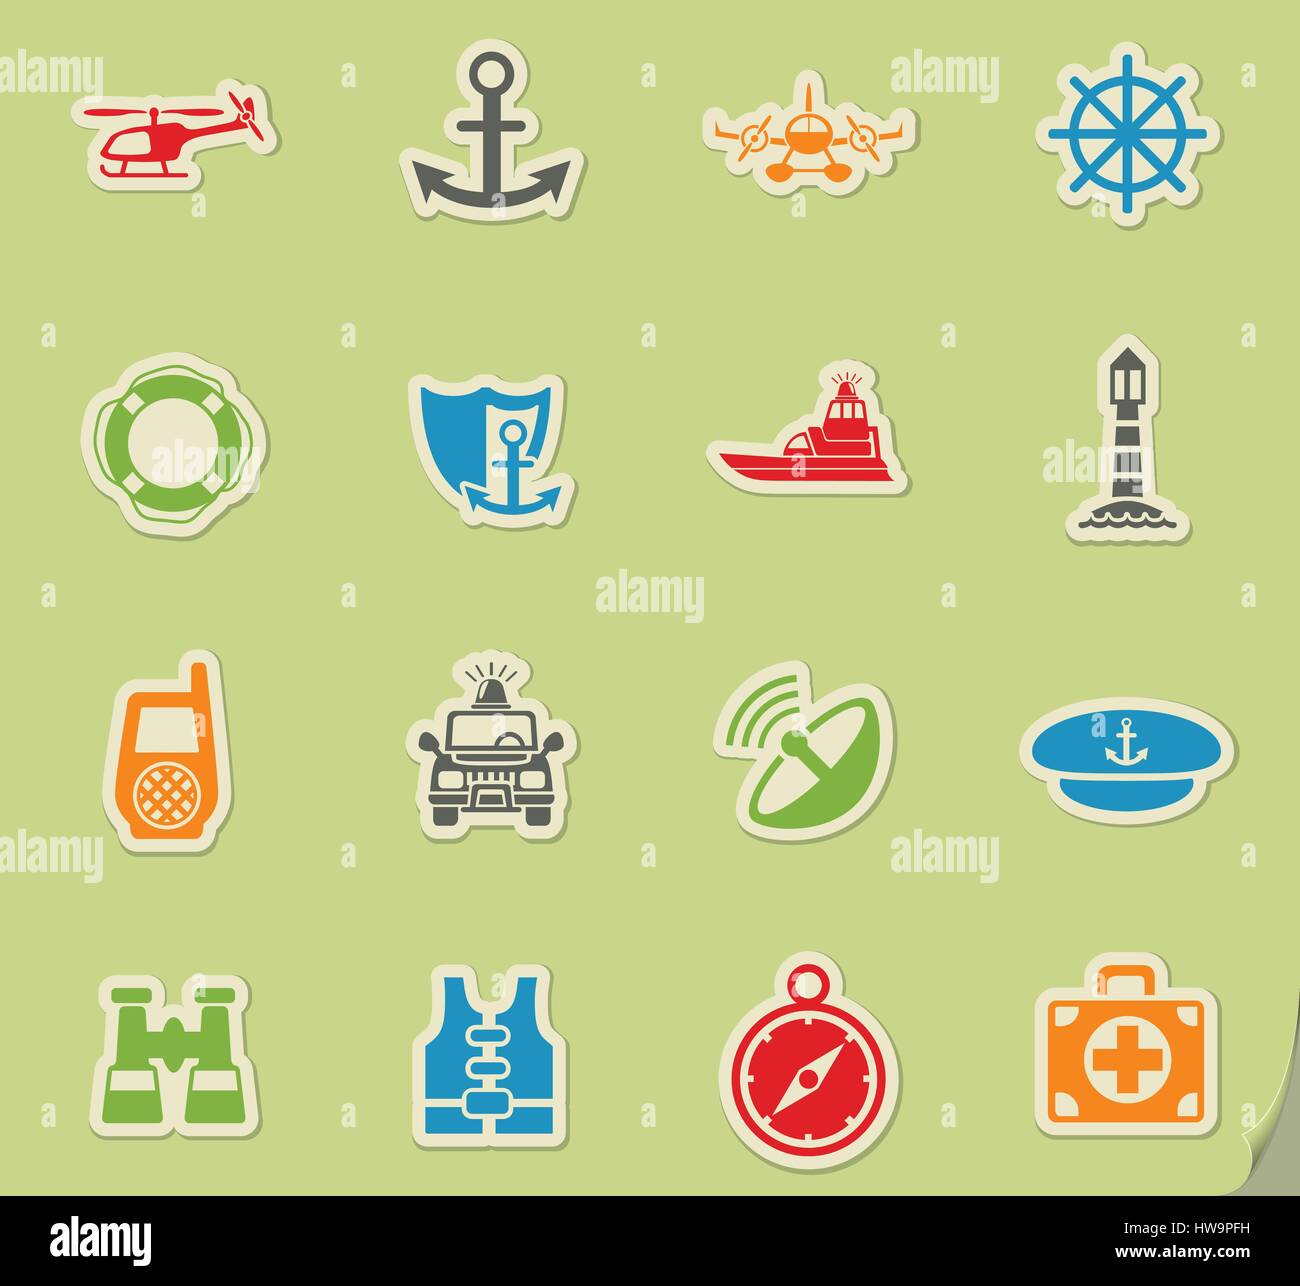 coastguard web icons on color paper stickers for user interface Stock Vector